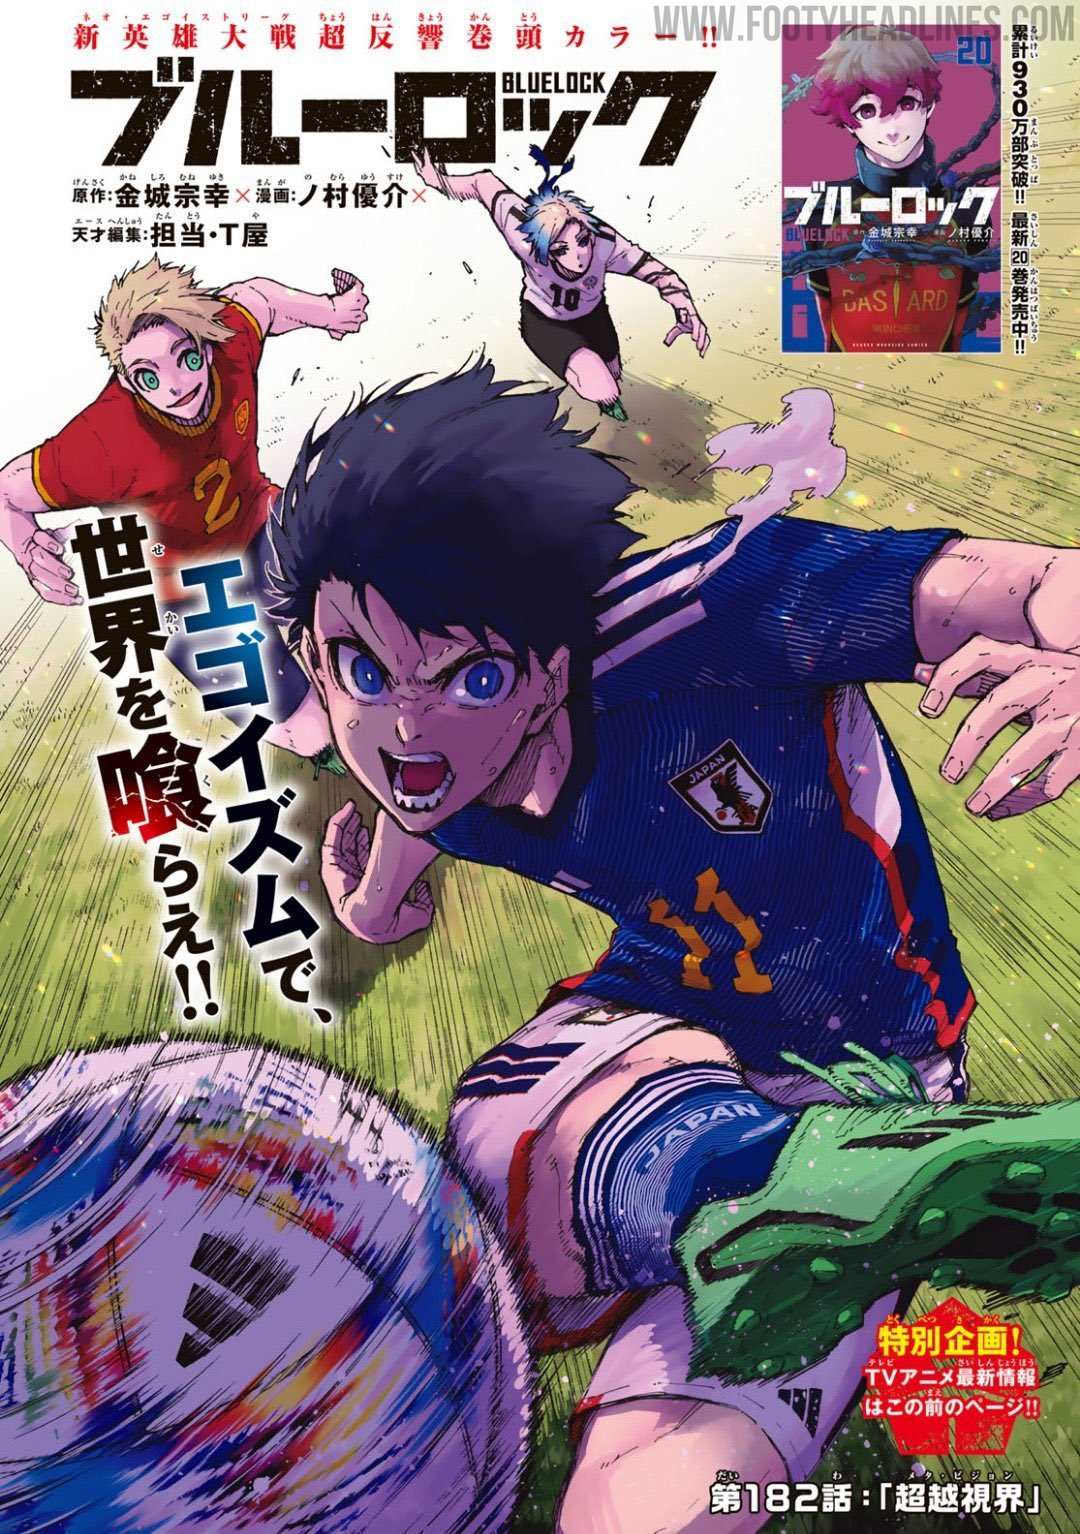 Which Anime Has Influenced The Japanese Team Jersey For FIFA World Cup 2022   FirstCuriosity